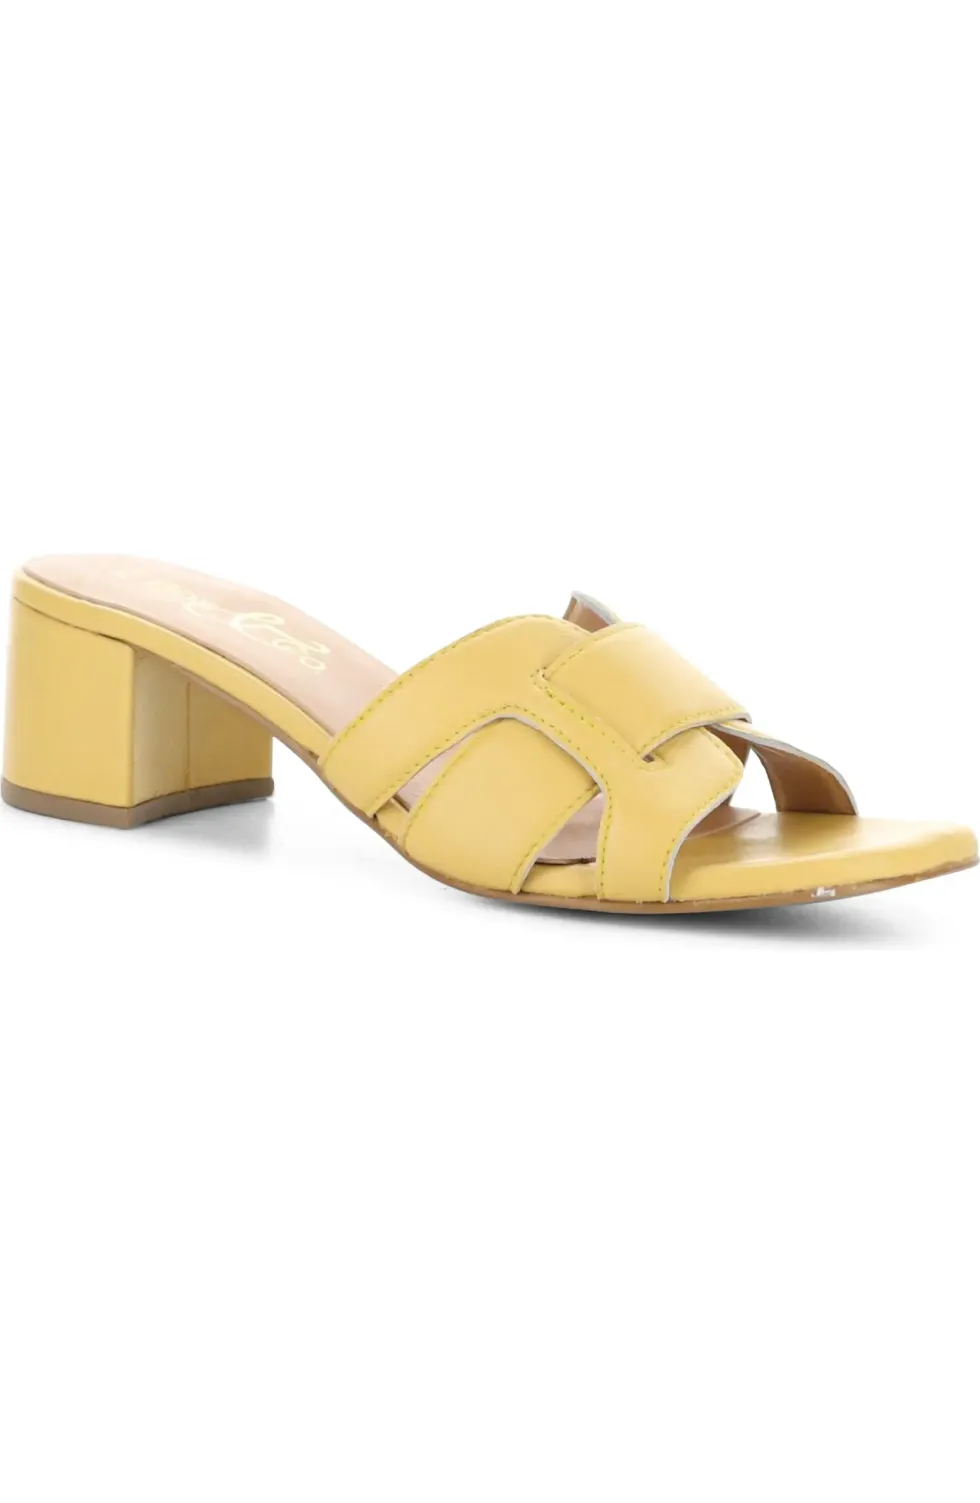 butter yellow Bos. & Co. Uplift Sandal